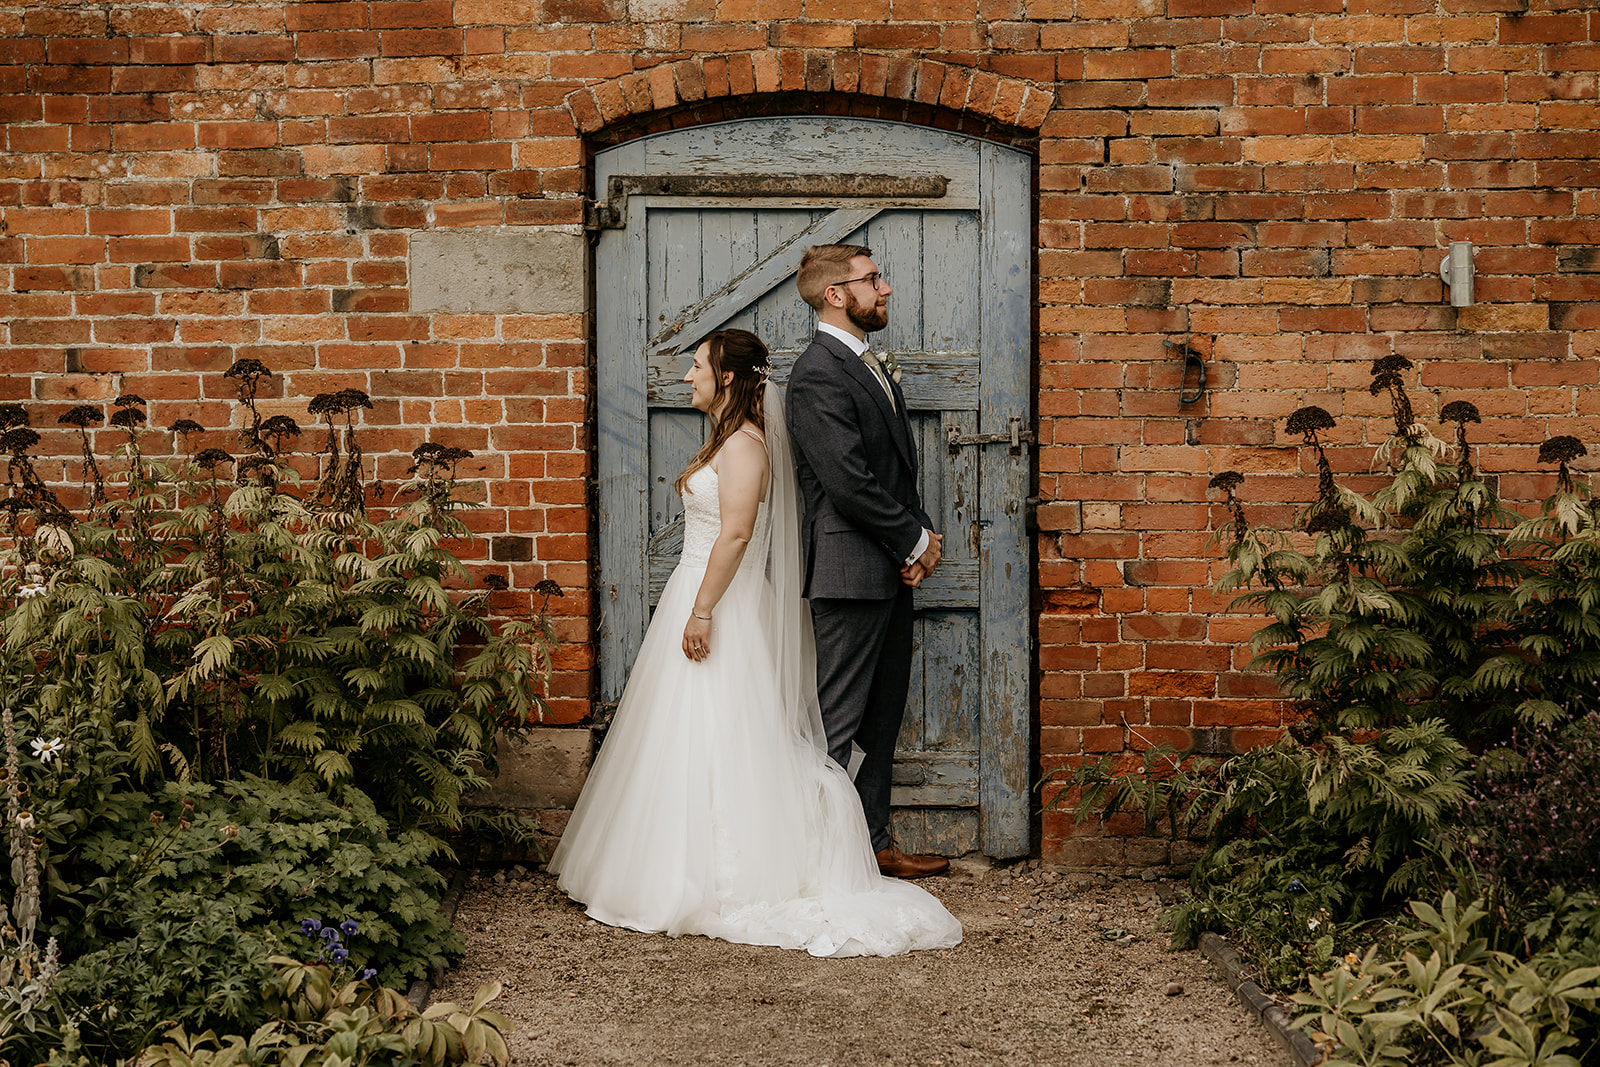 artistic wedding day pictures at cripps and co wedding